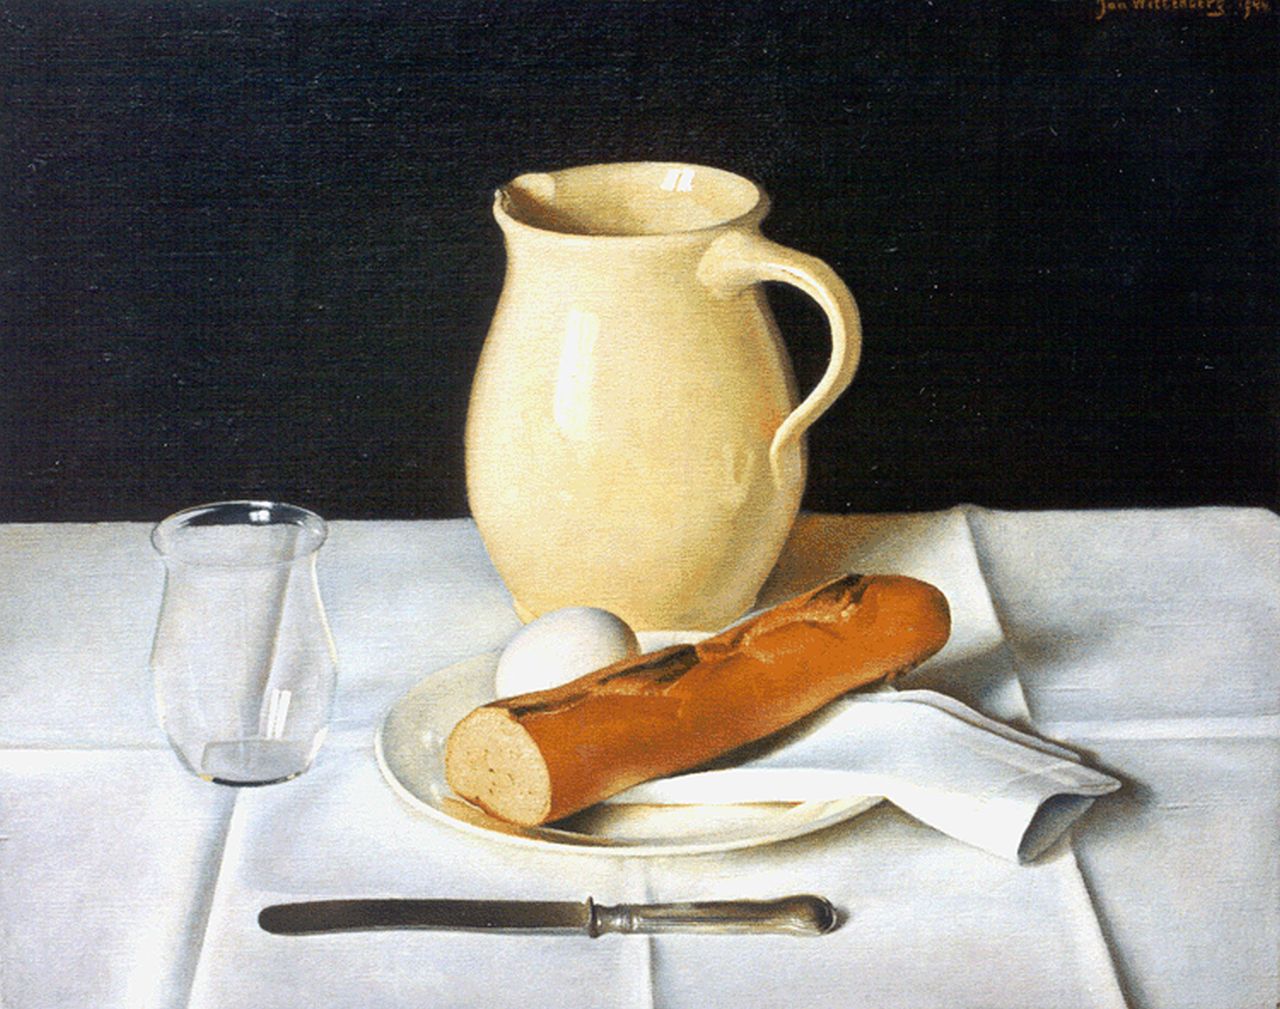 Wittenberg J.H.W.  | 'Jan' Hendrik Willem Wittenberg, A still life with bread, oil on canvas 40.1 x 50.3 cm, signed u.r. and dated 1944